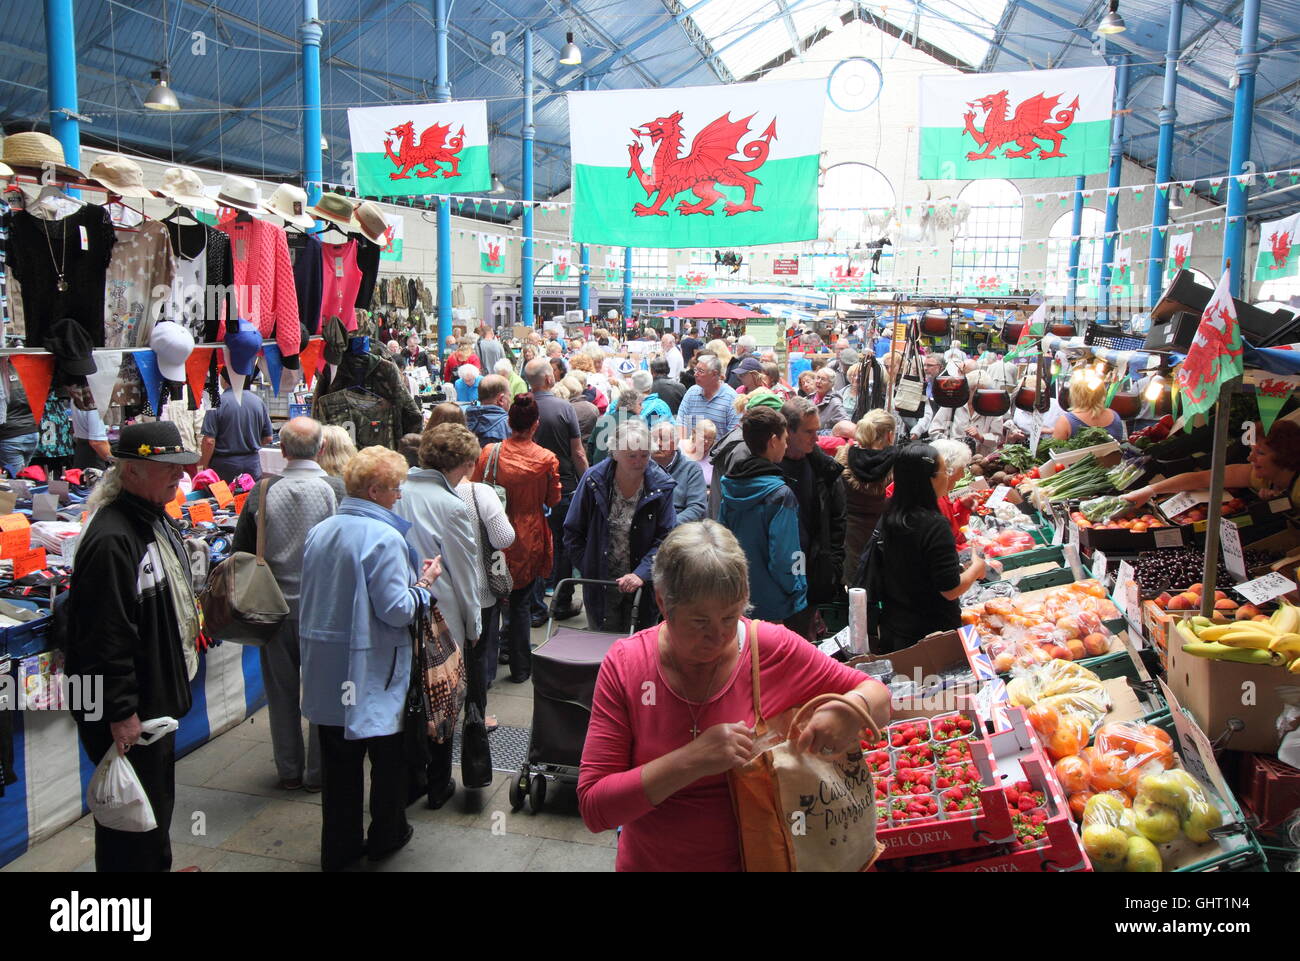 Interior of the Market Hall in the town of Abergavenny during a busy